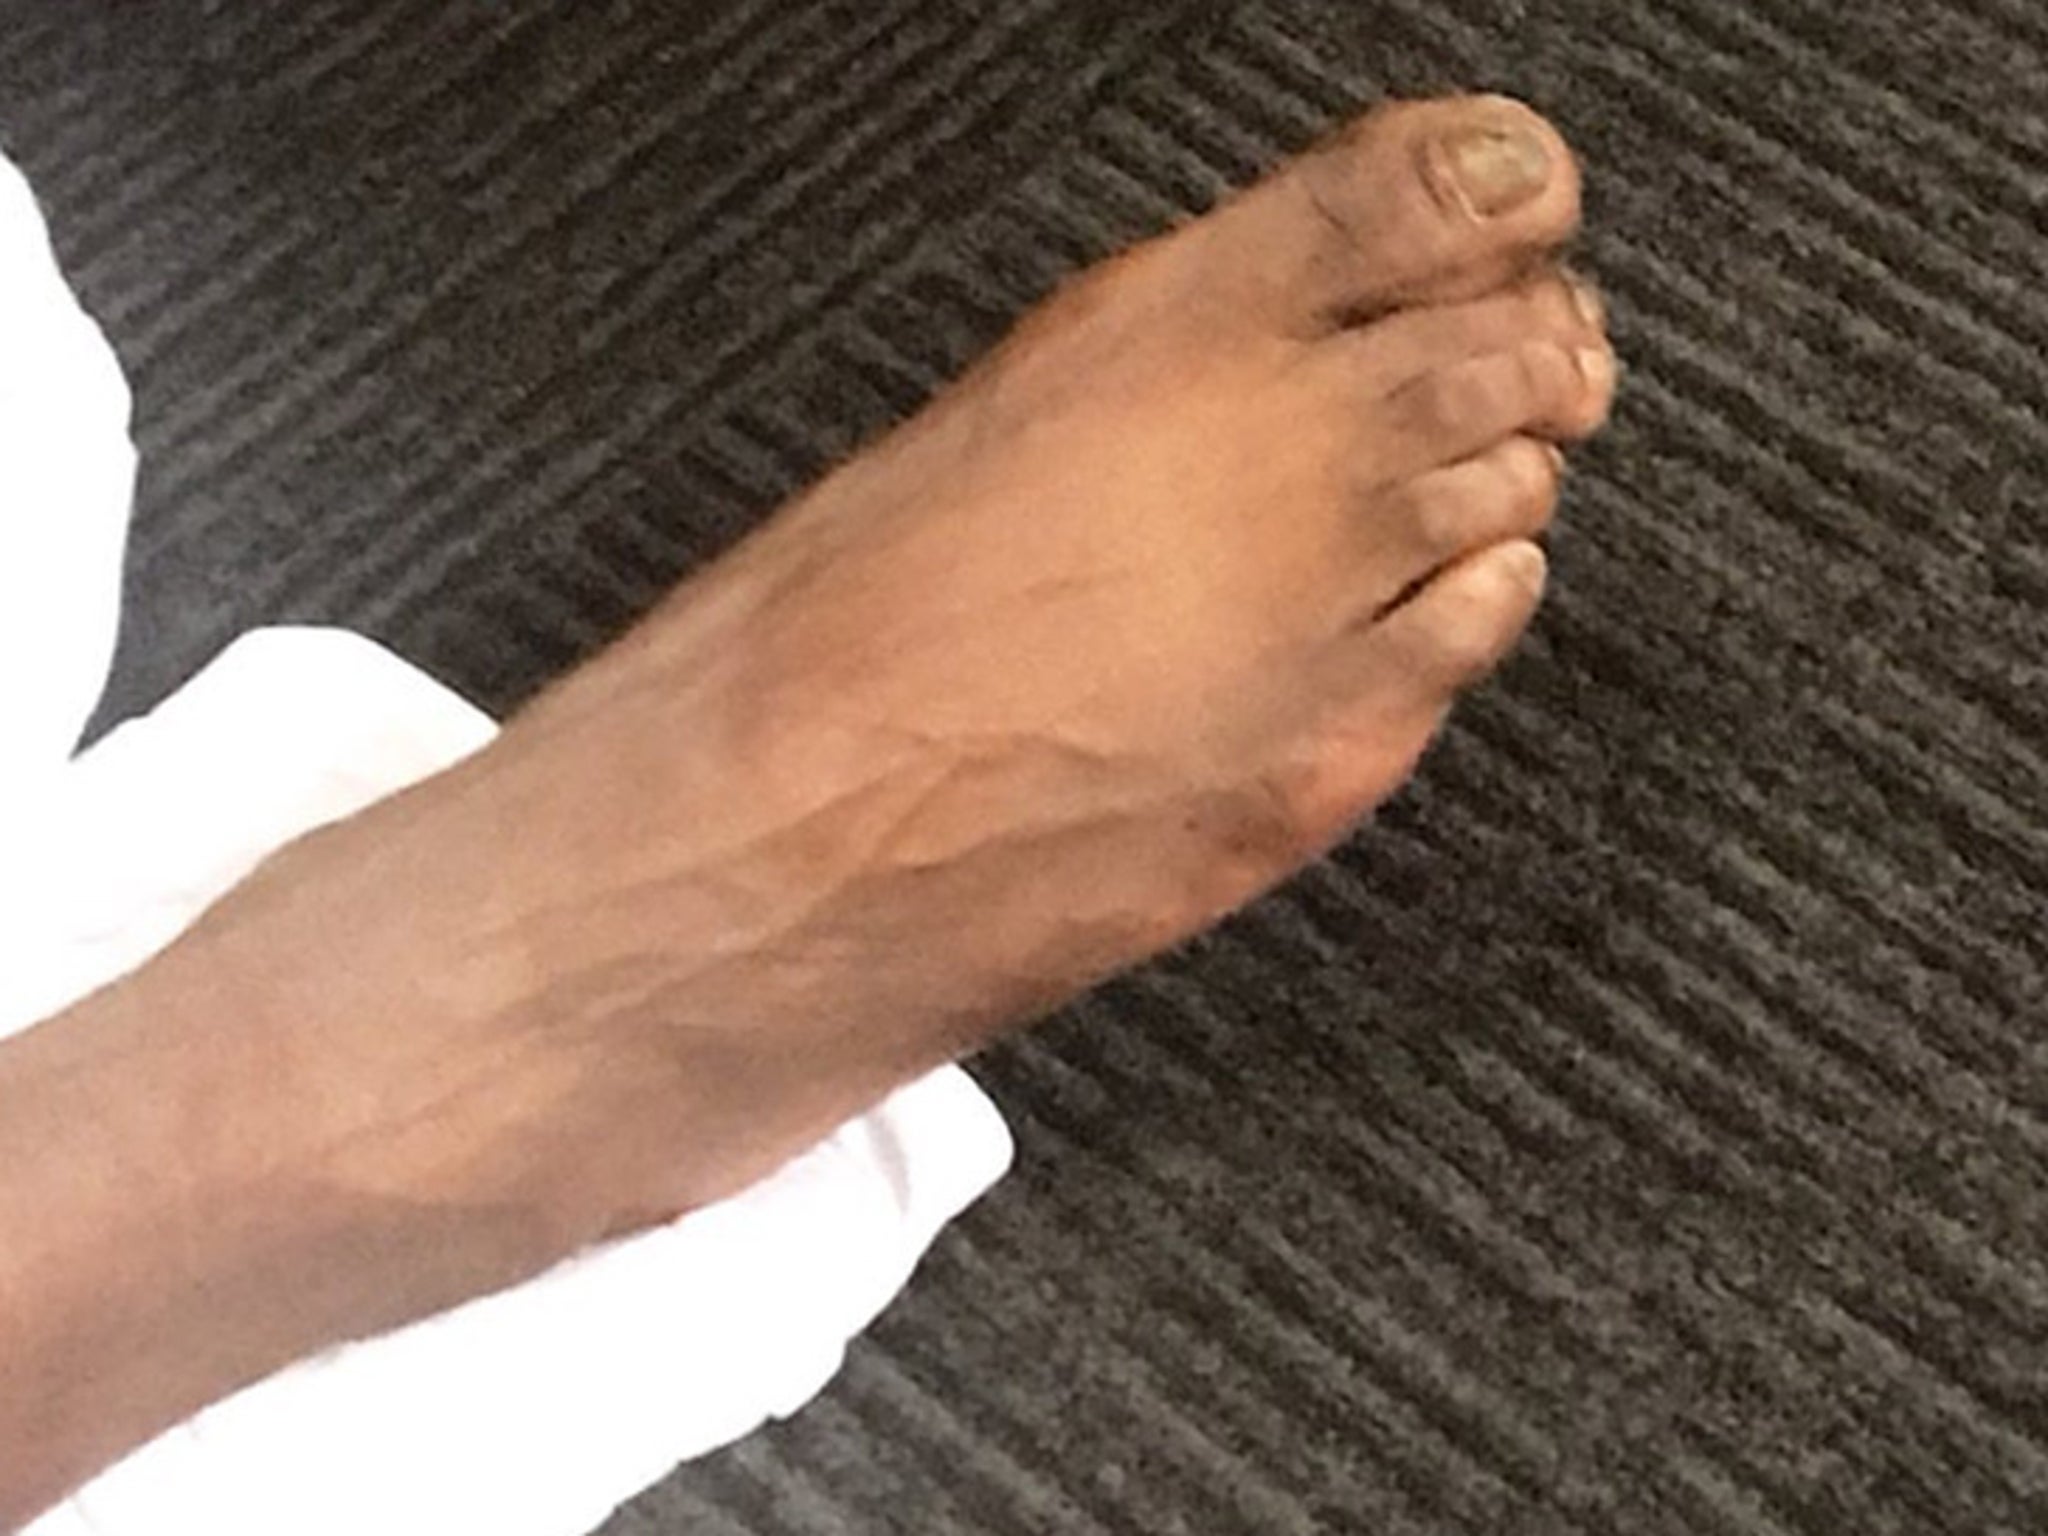 Why do guys have ugly feet